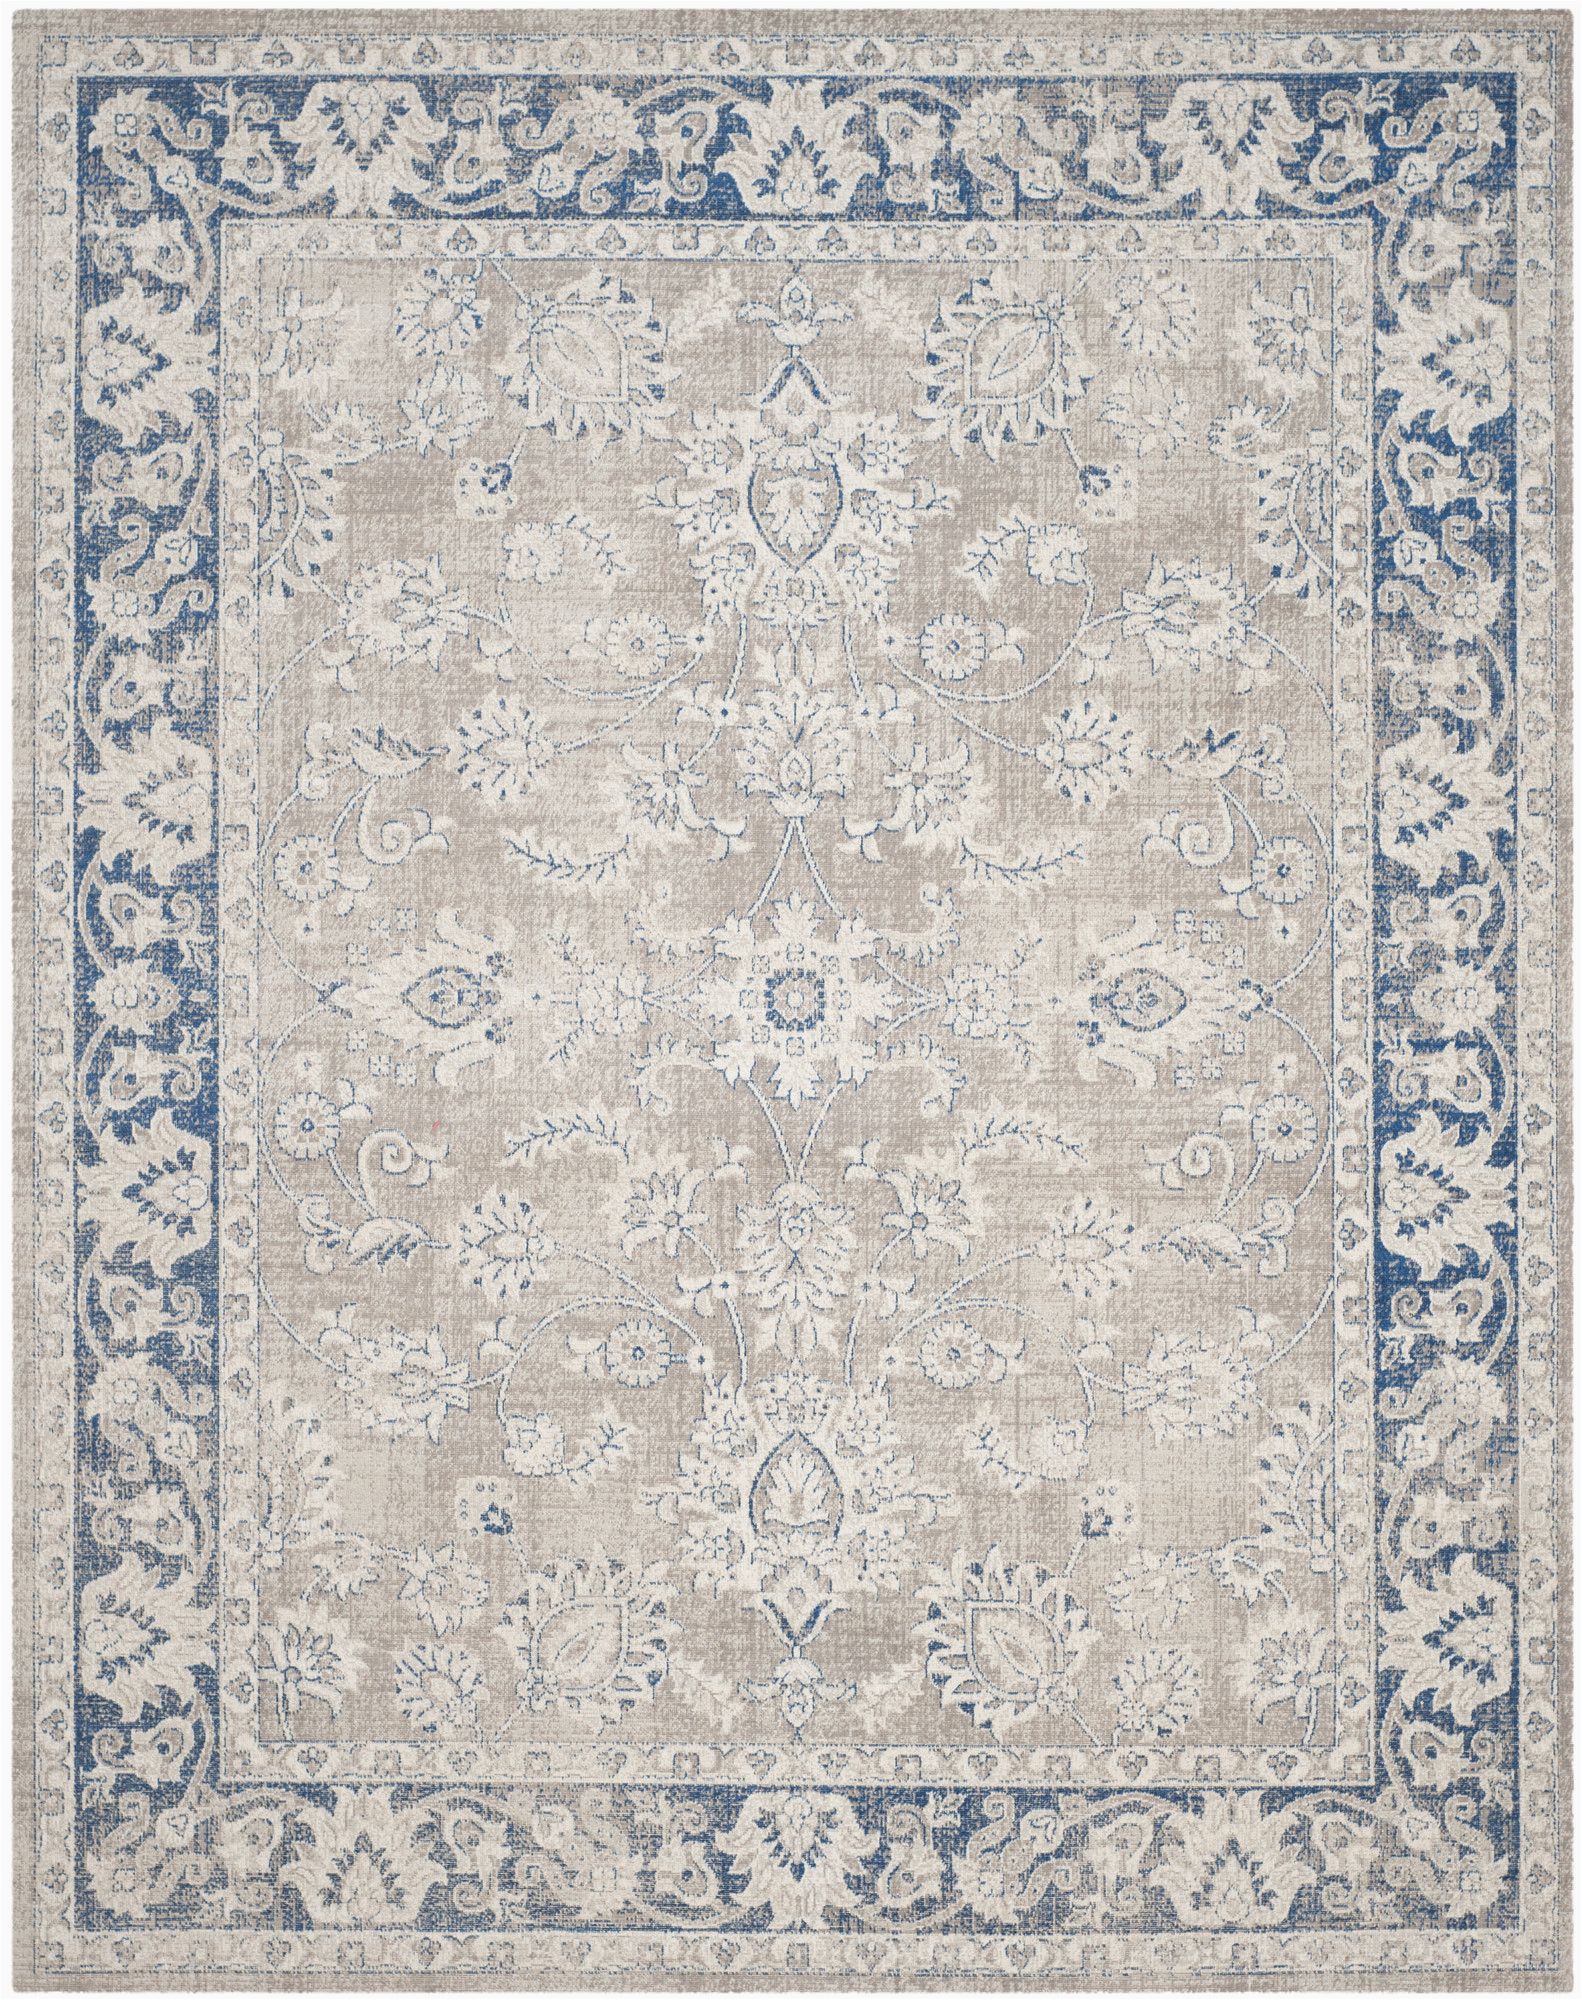 Taupe and Blue Rug Cecily Rug In Taupe & Blue Joss & Main